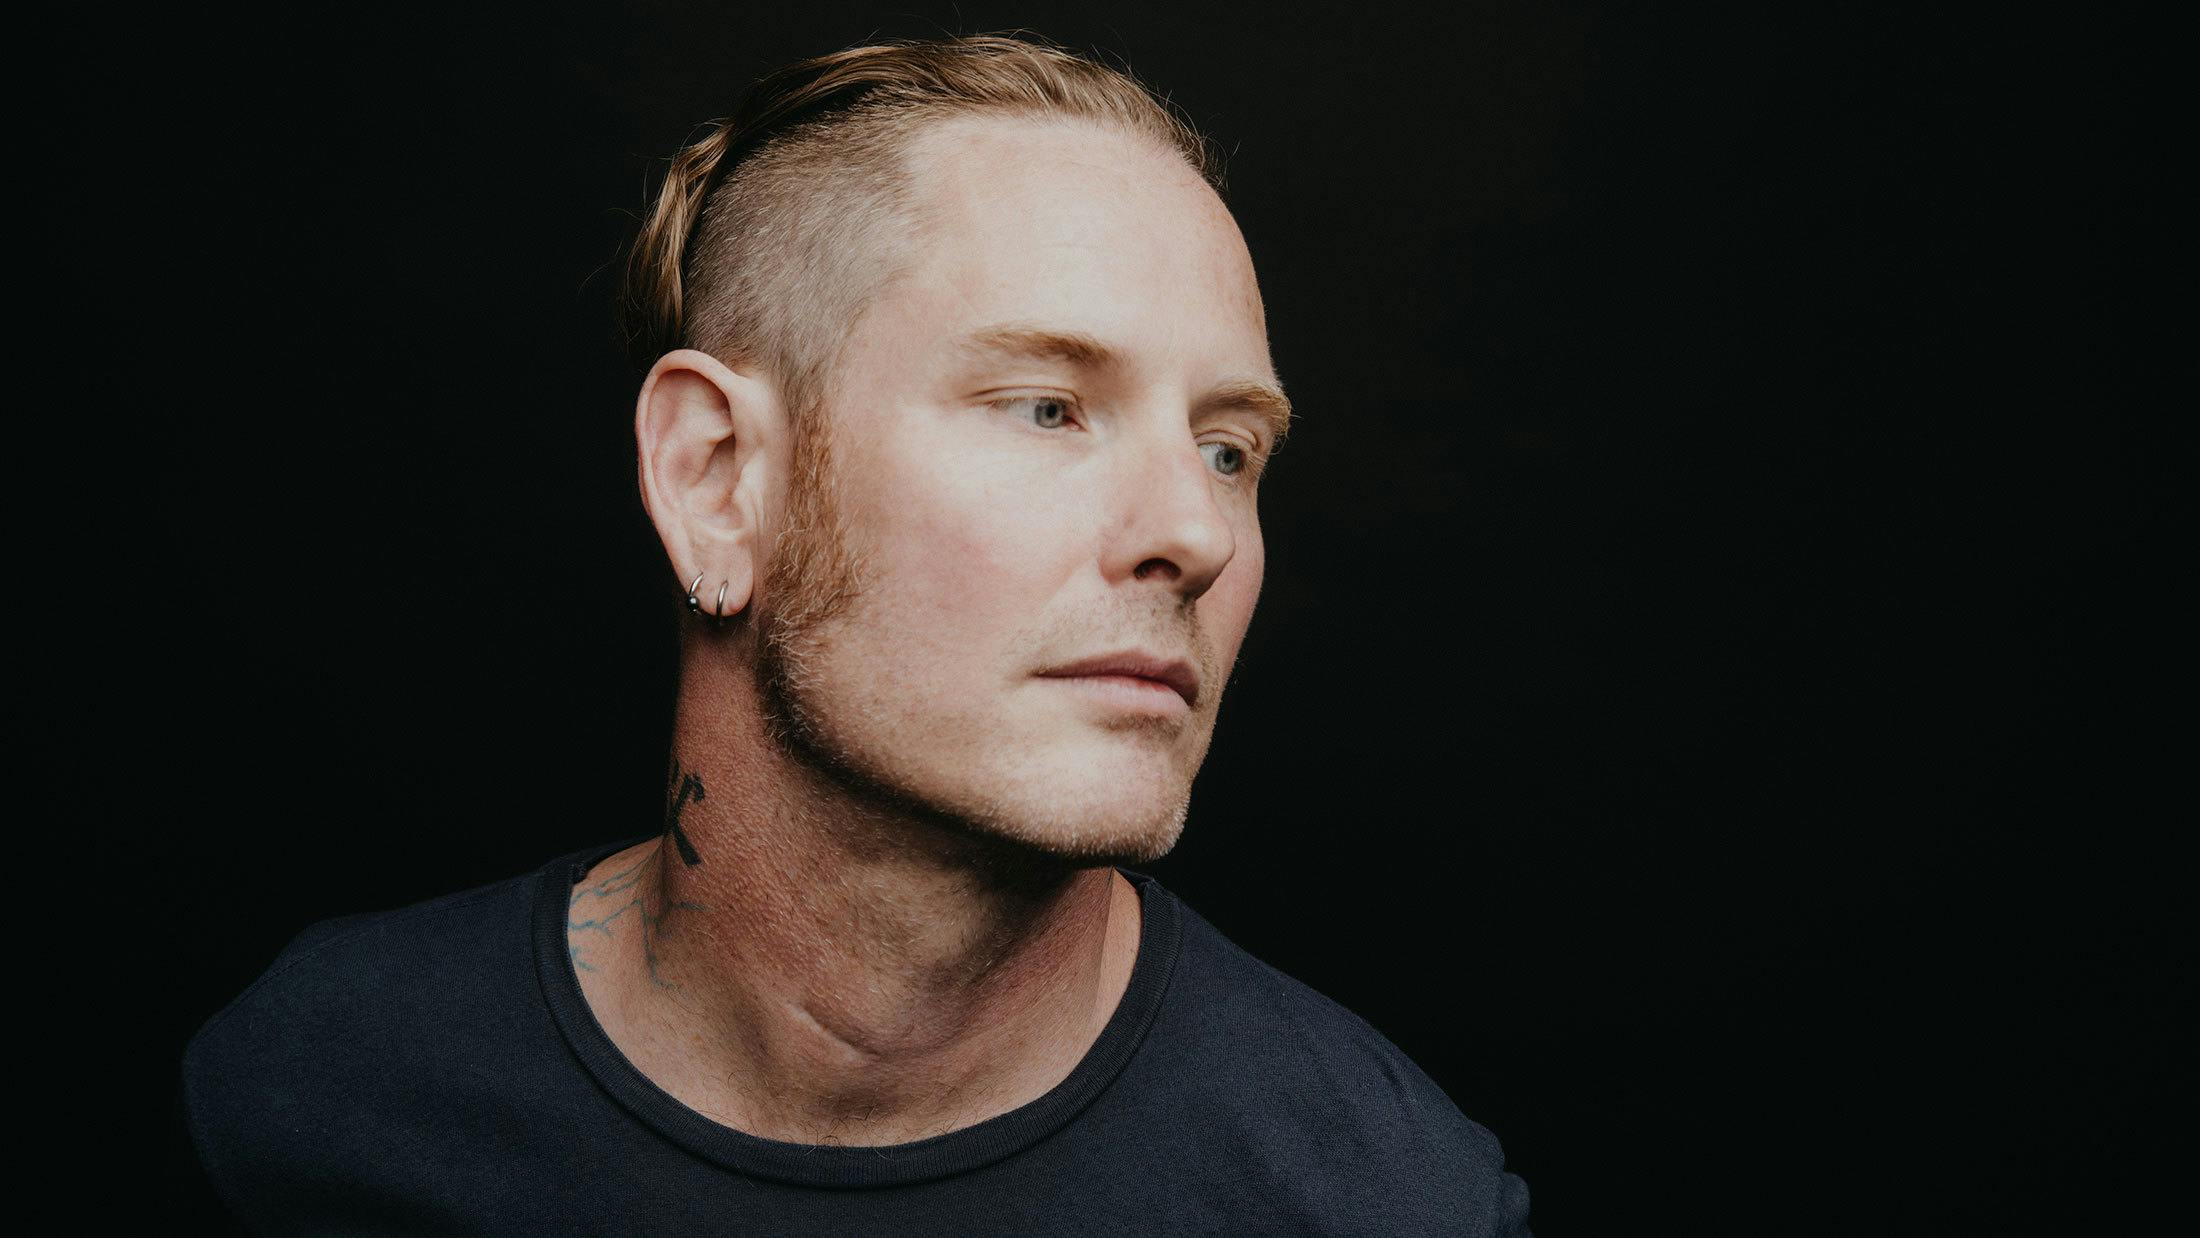 Corey Taylor tests positive for COVID-19: "I'm very, very sick"